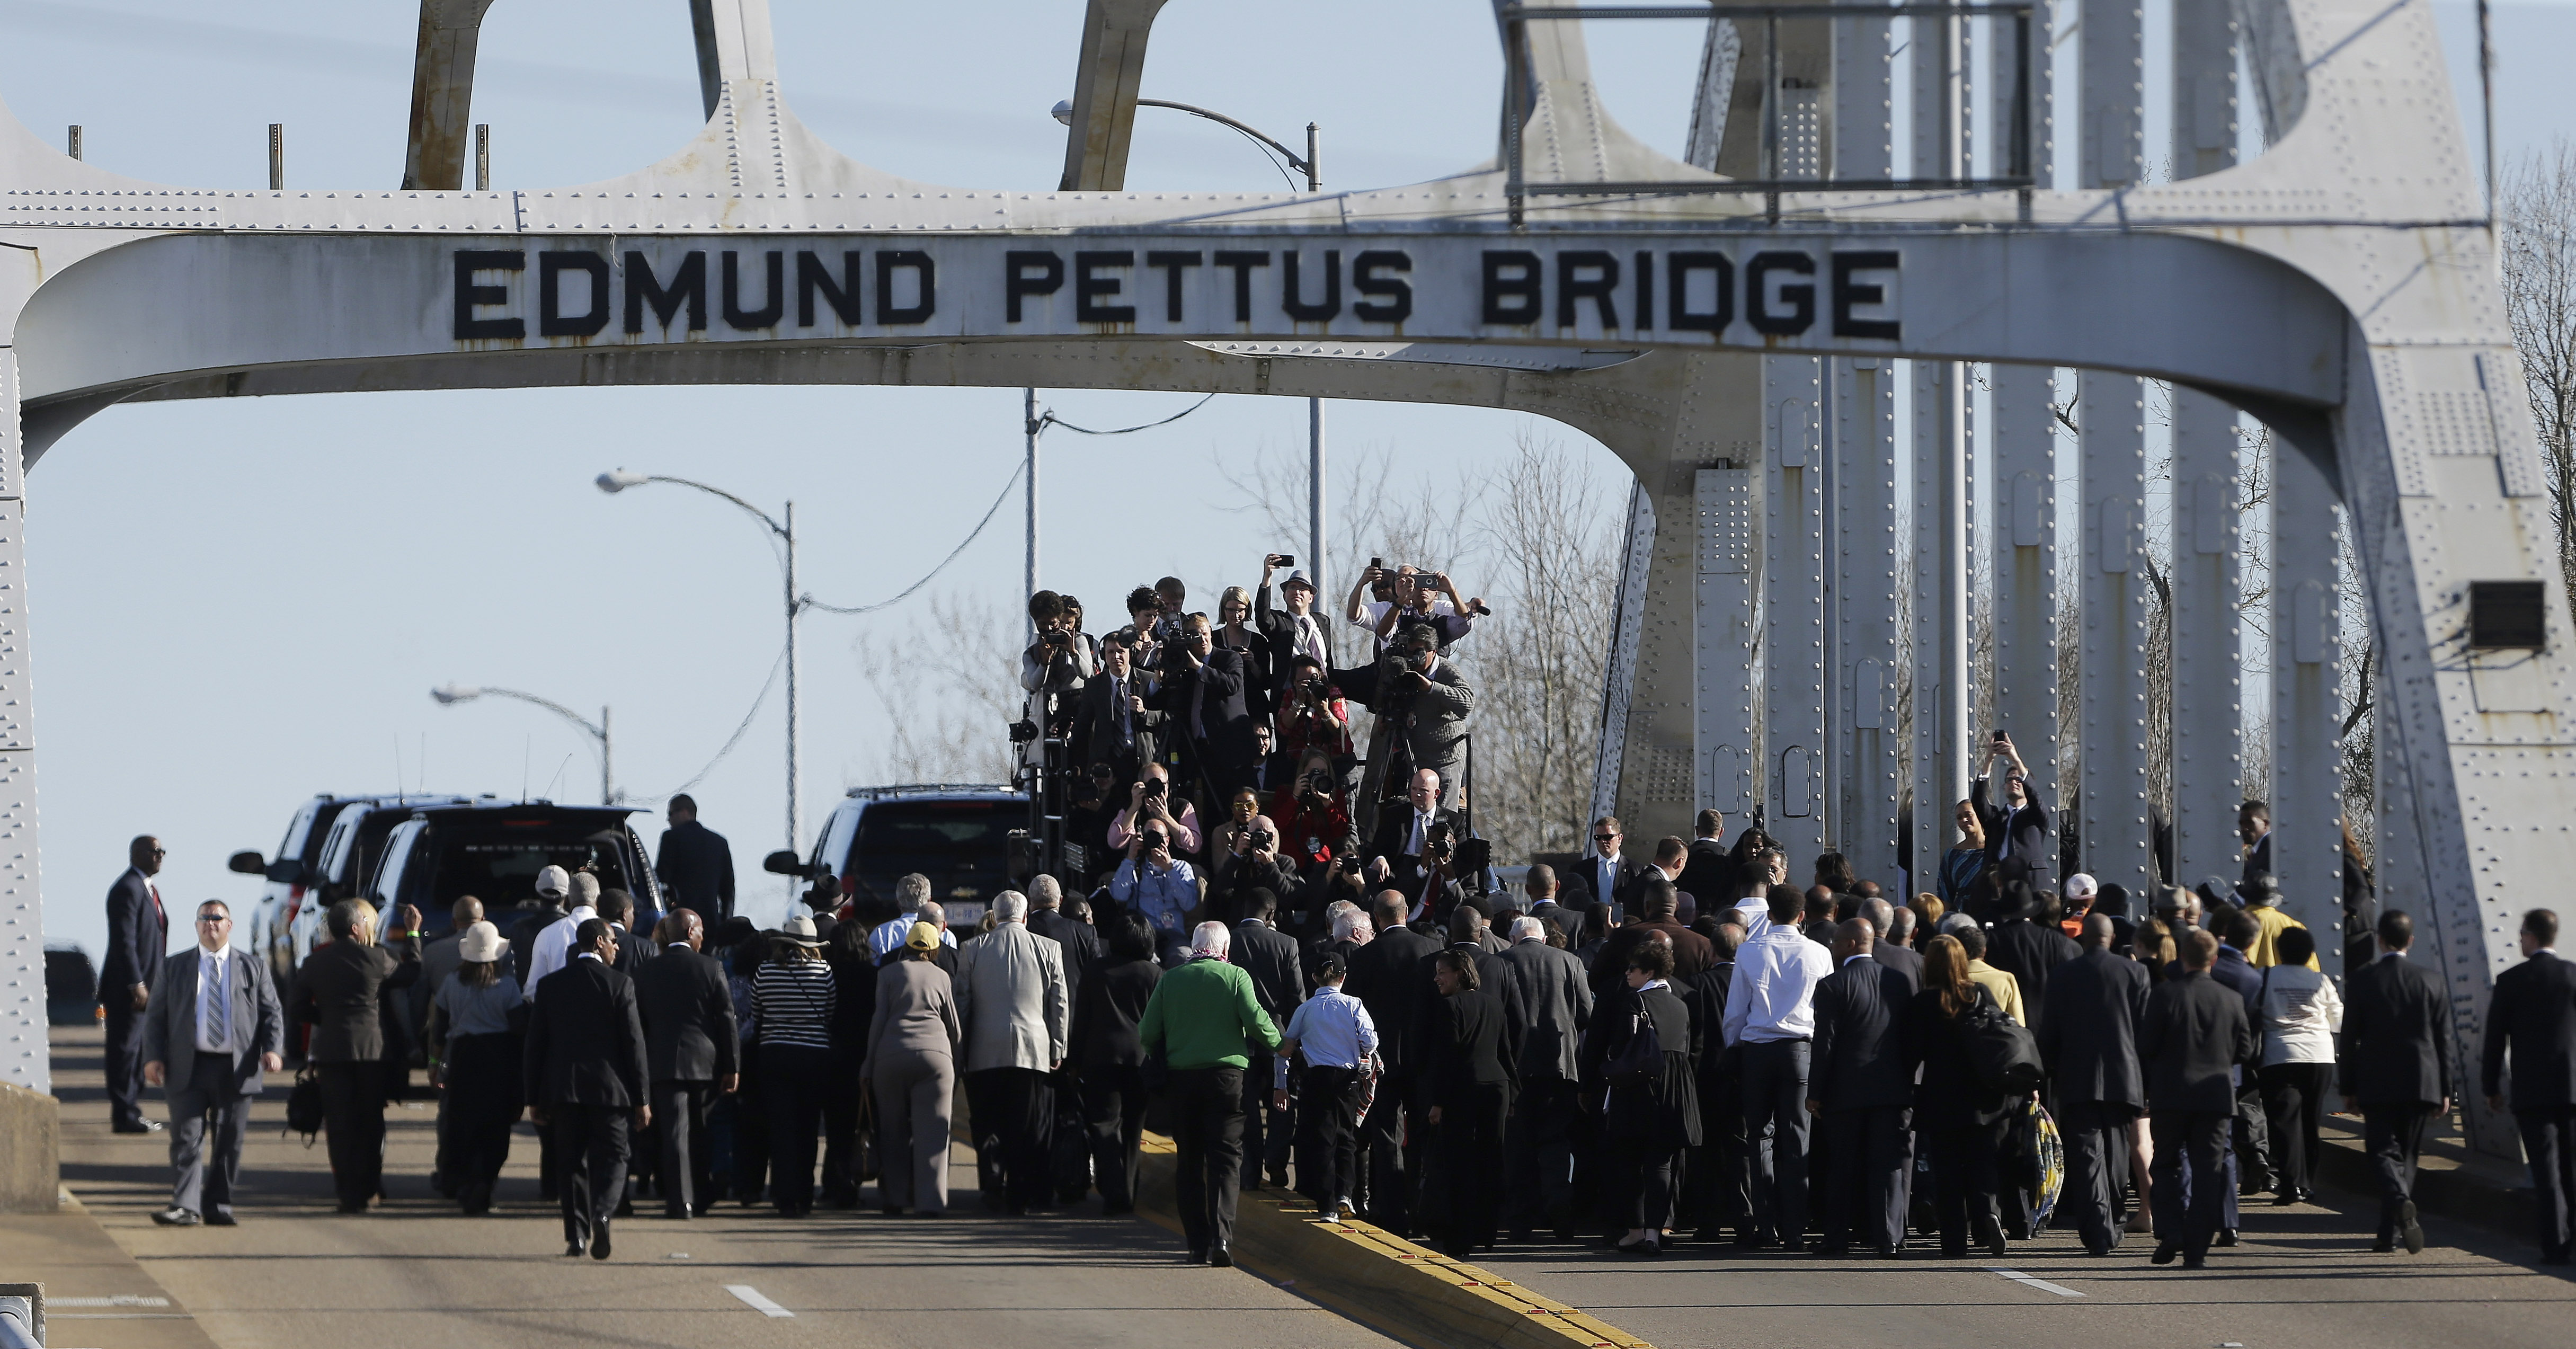 Selma civil rights milestone marked by first black president - The Blade4862 x 2546